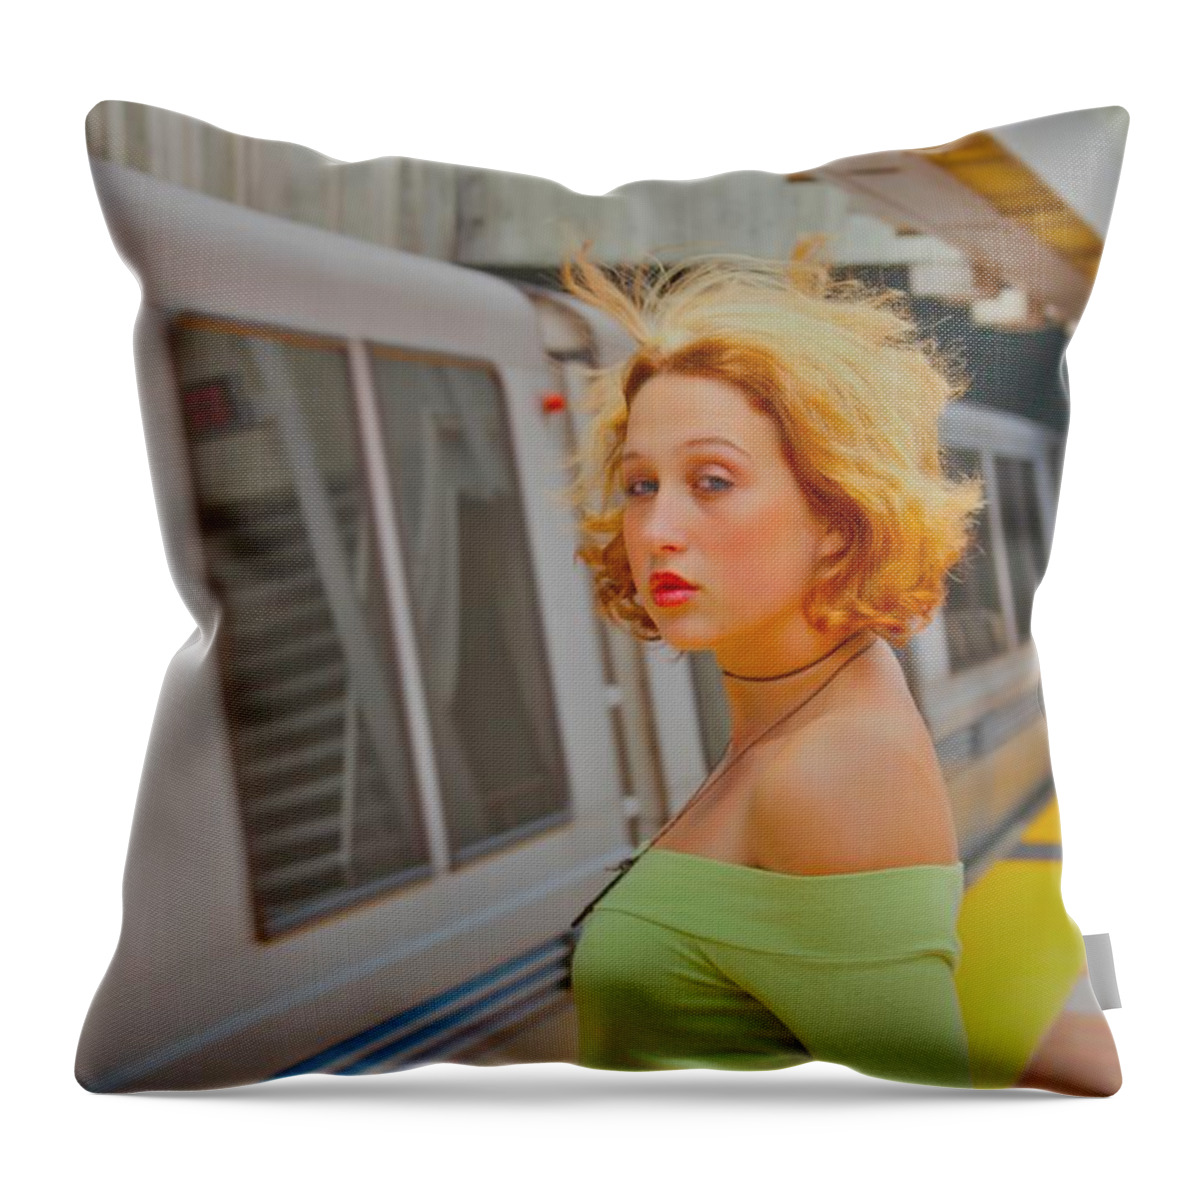 Woman Throw Pillow featuring the photograph The Arrangement by Nick David